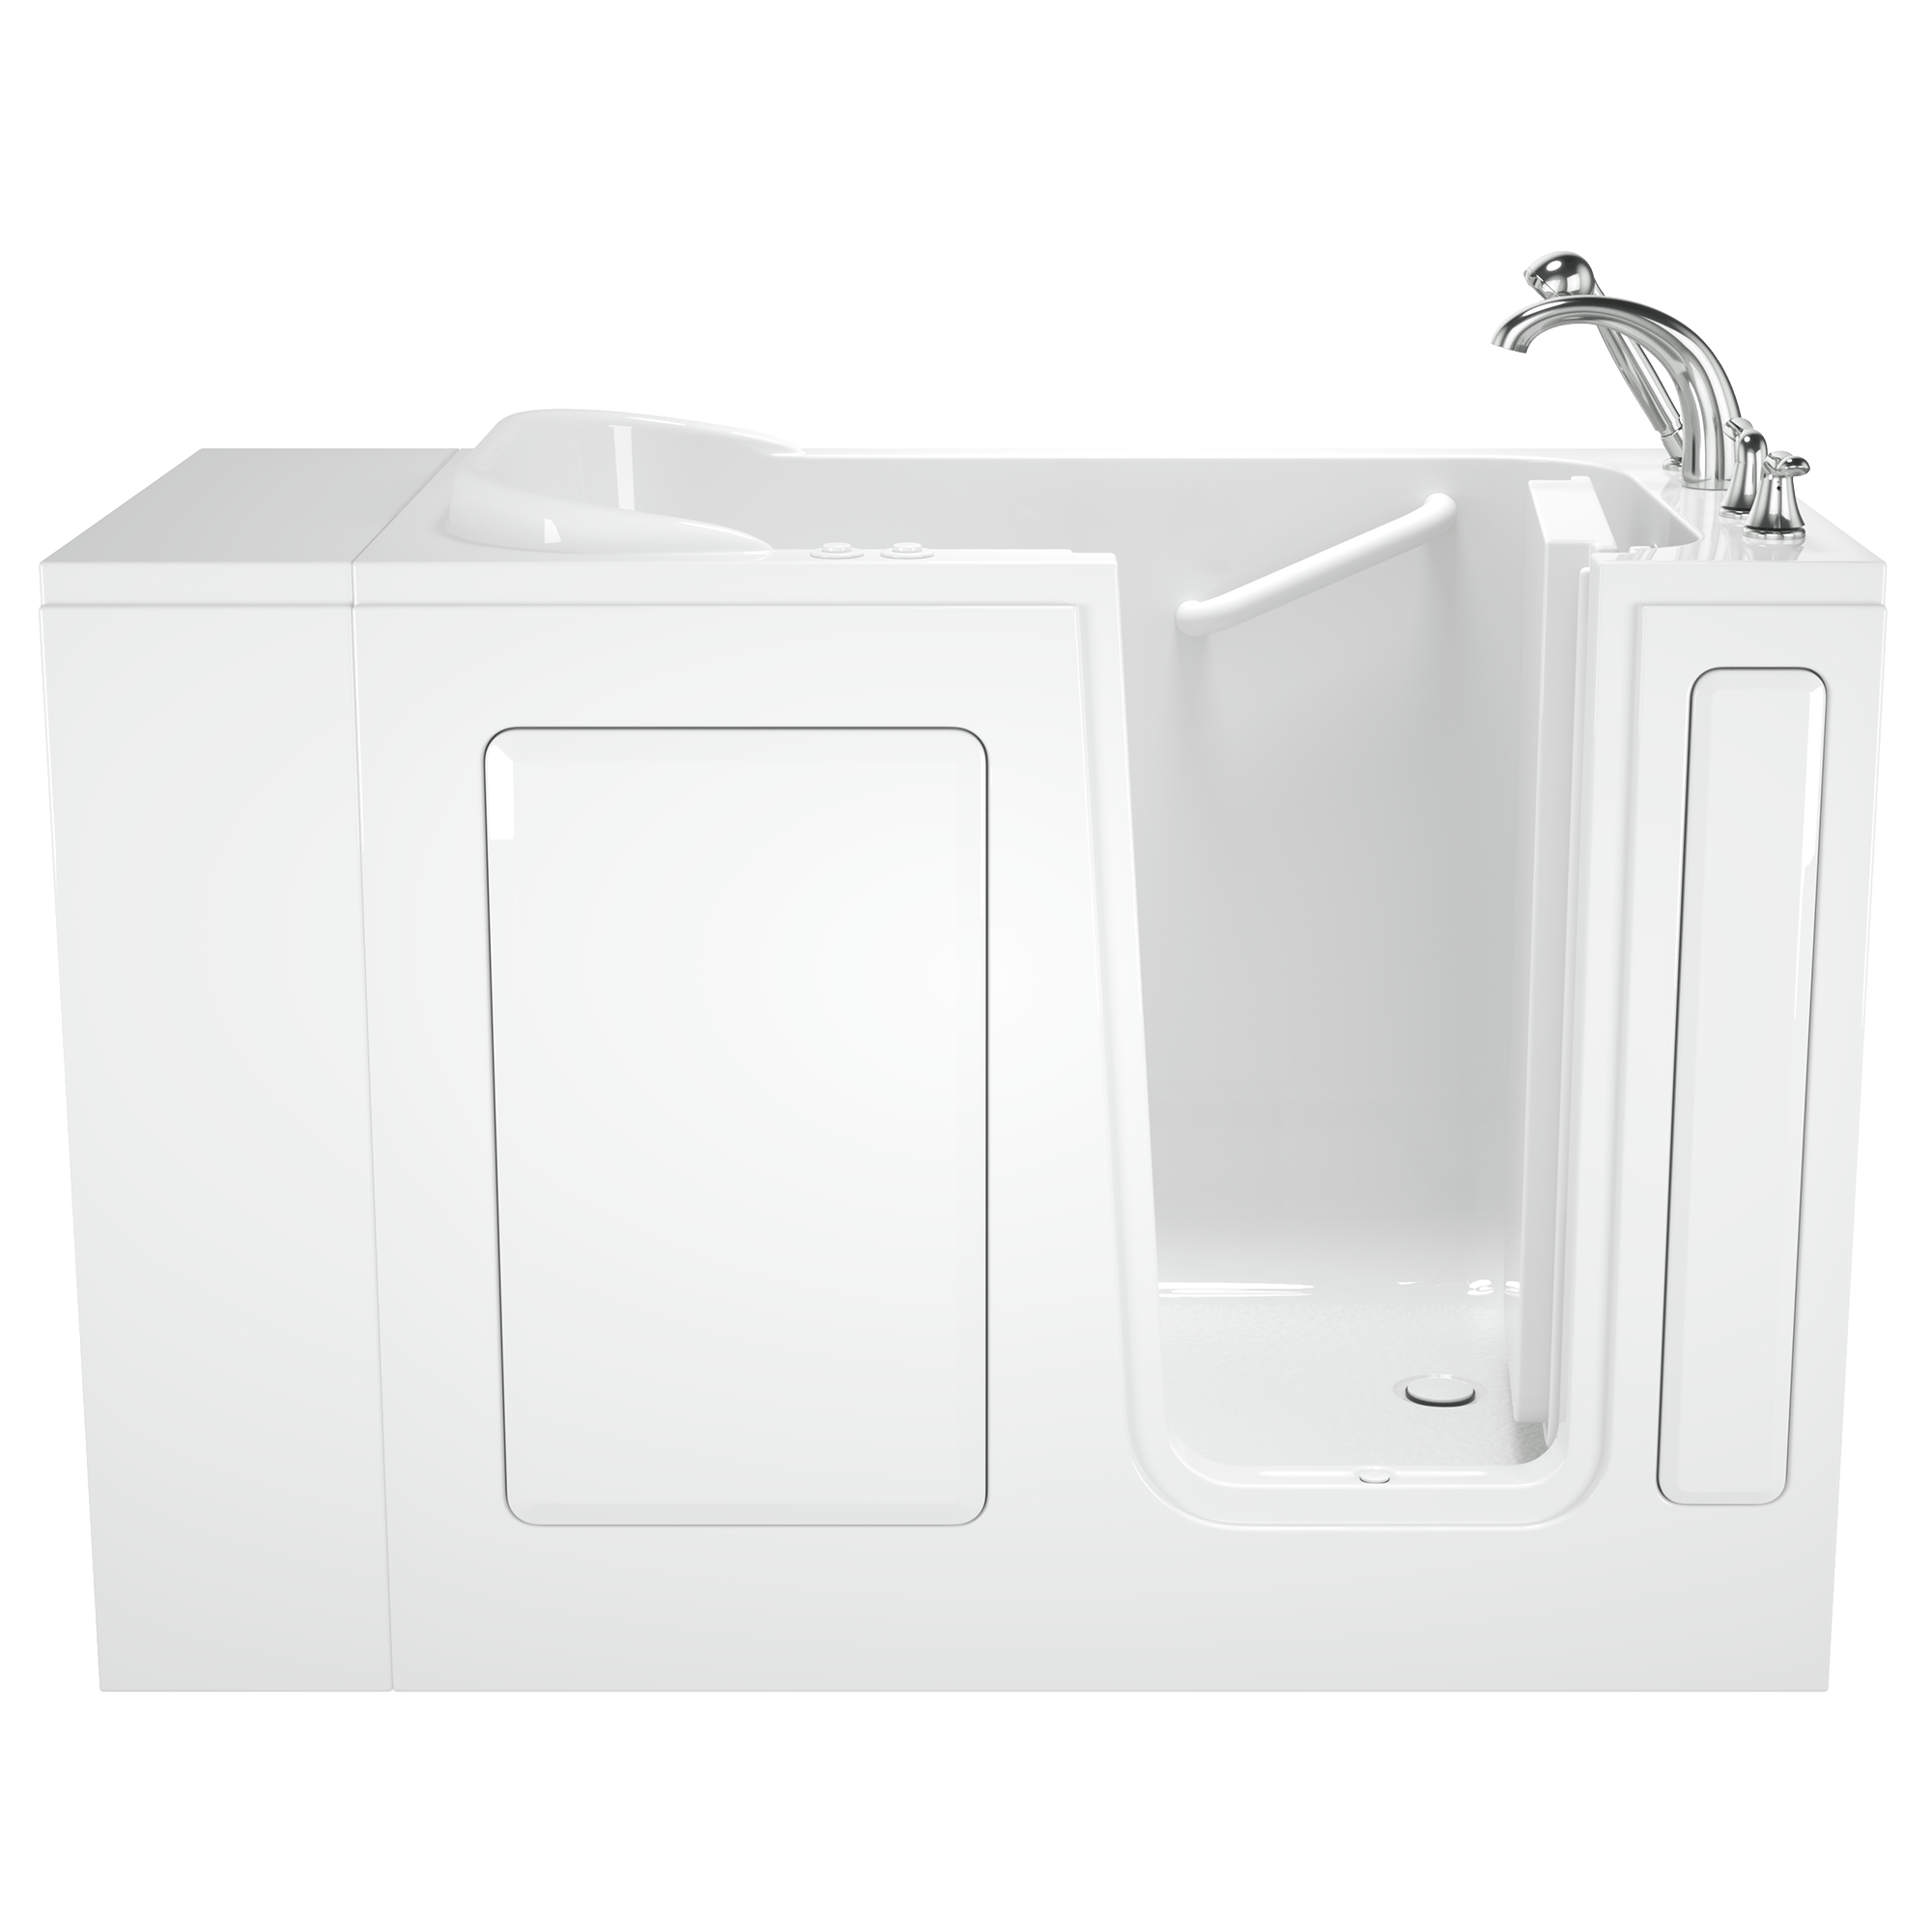 Gelcoat Entry Series 48 x 28 Inch Walk In Tub With Combination Air Spa and Whirlpool Systems - Right Hand Drain With Faucet WIB WHITE